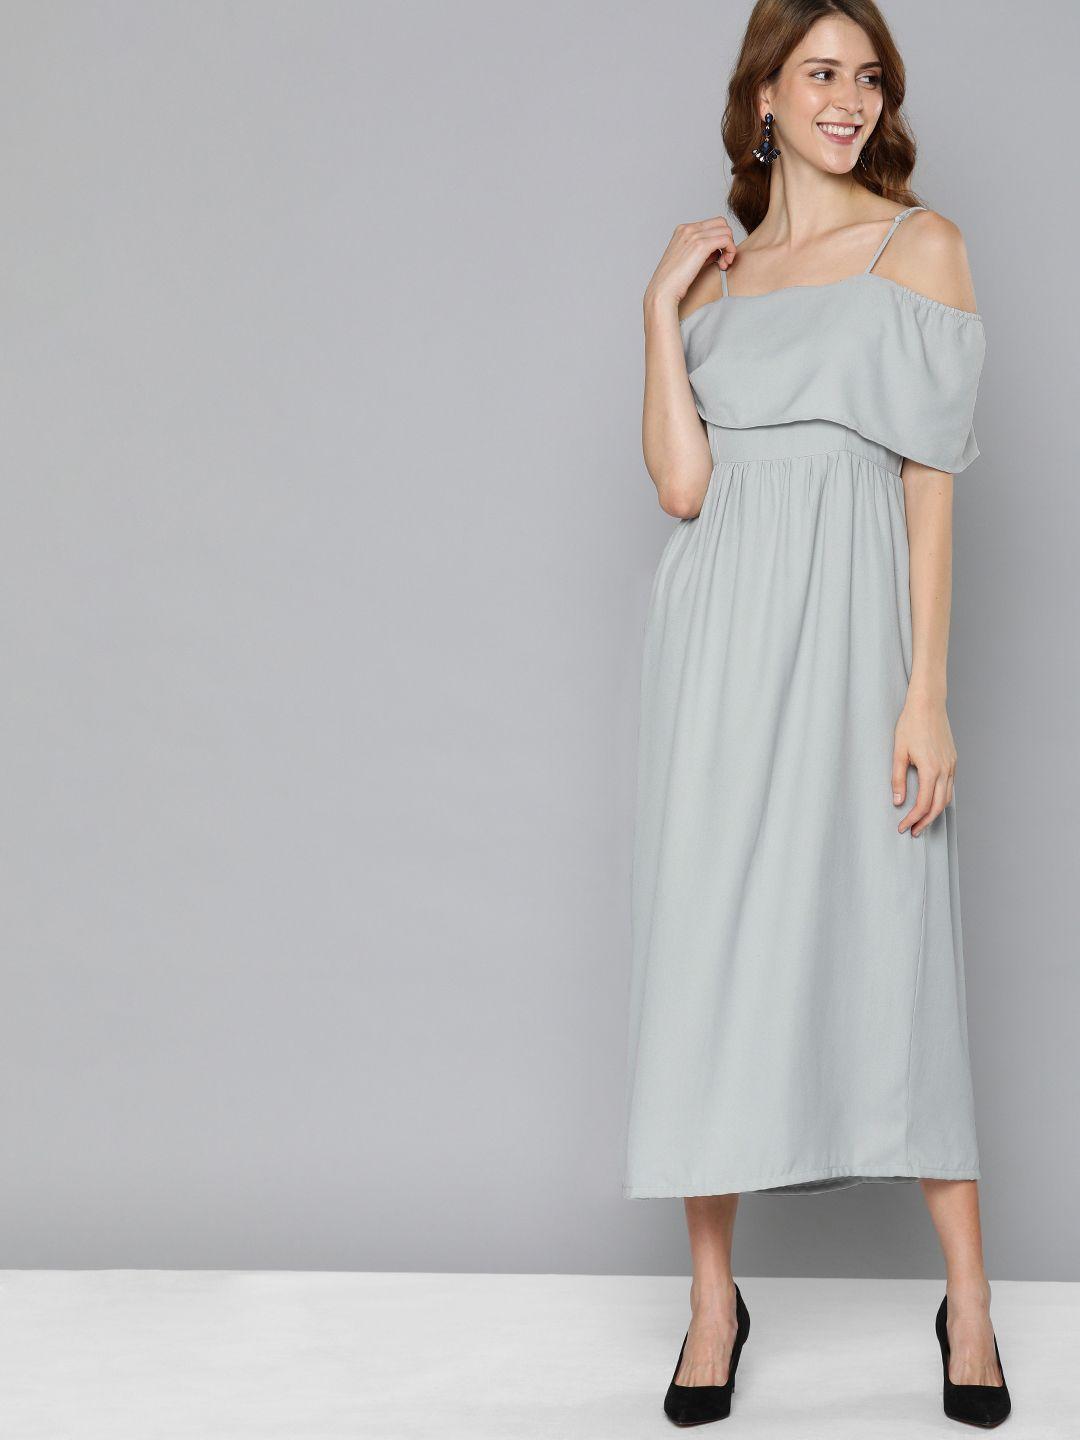 here&now women grey solid a-line dress